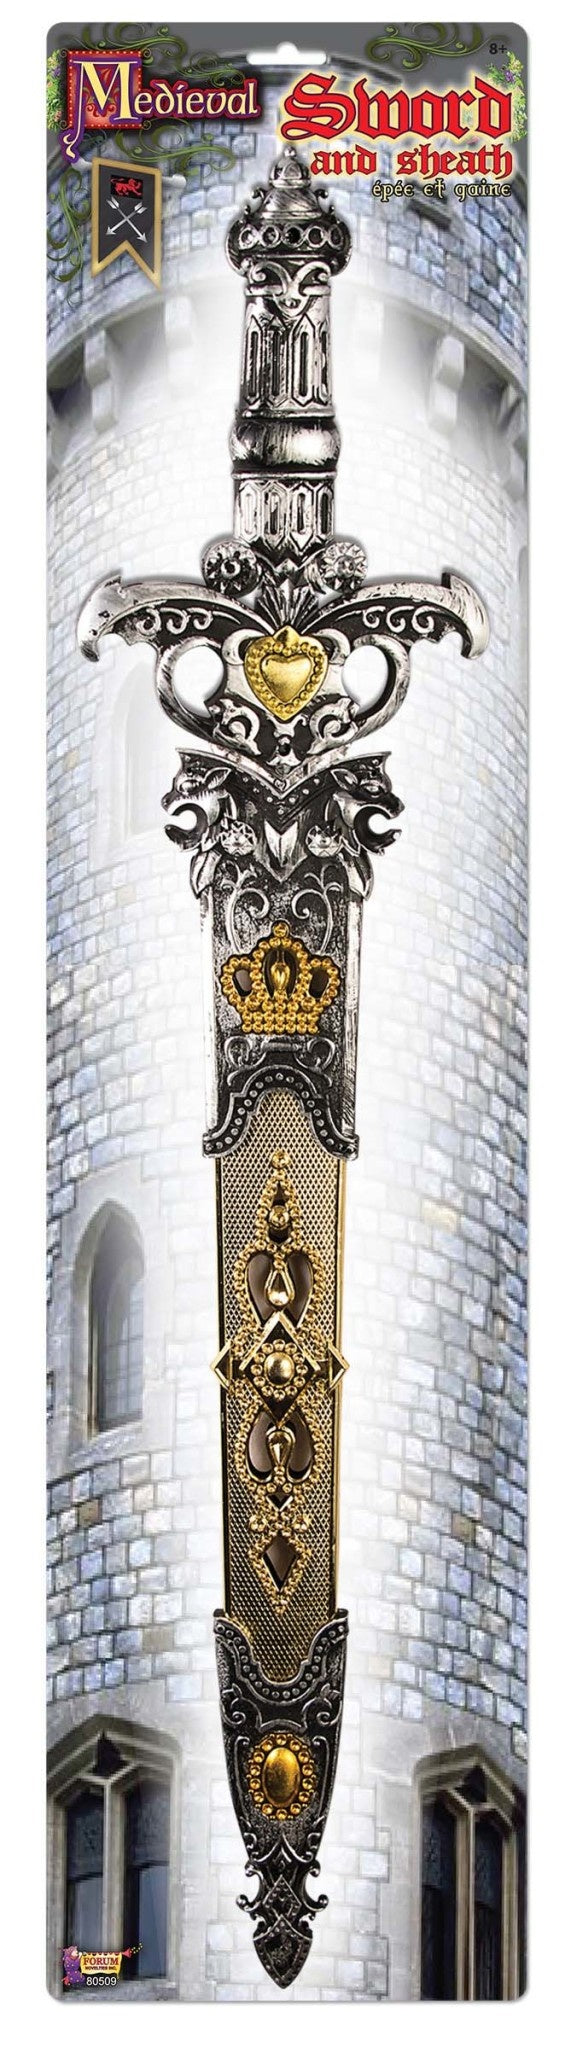 Medieval Knight Sword - Silver/Gold